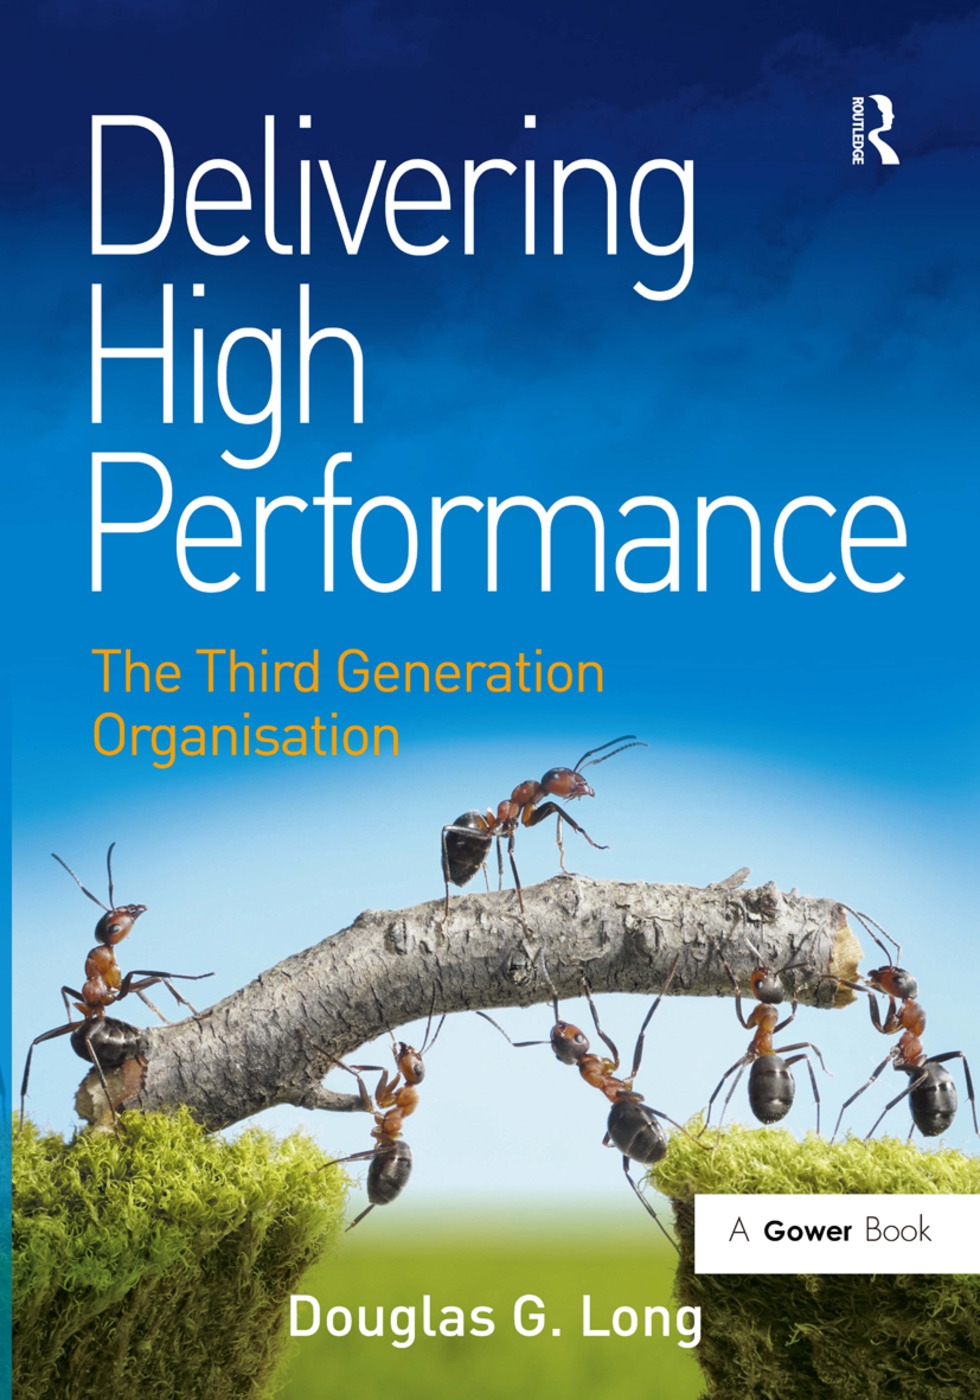 Delivering High Performance: The Third Generation Organisation. by Douglas G. Long